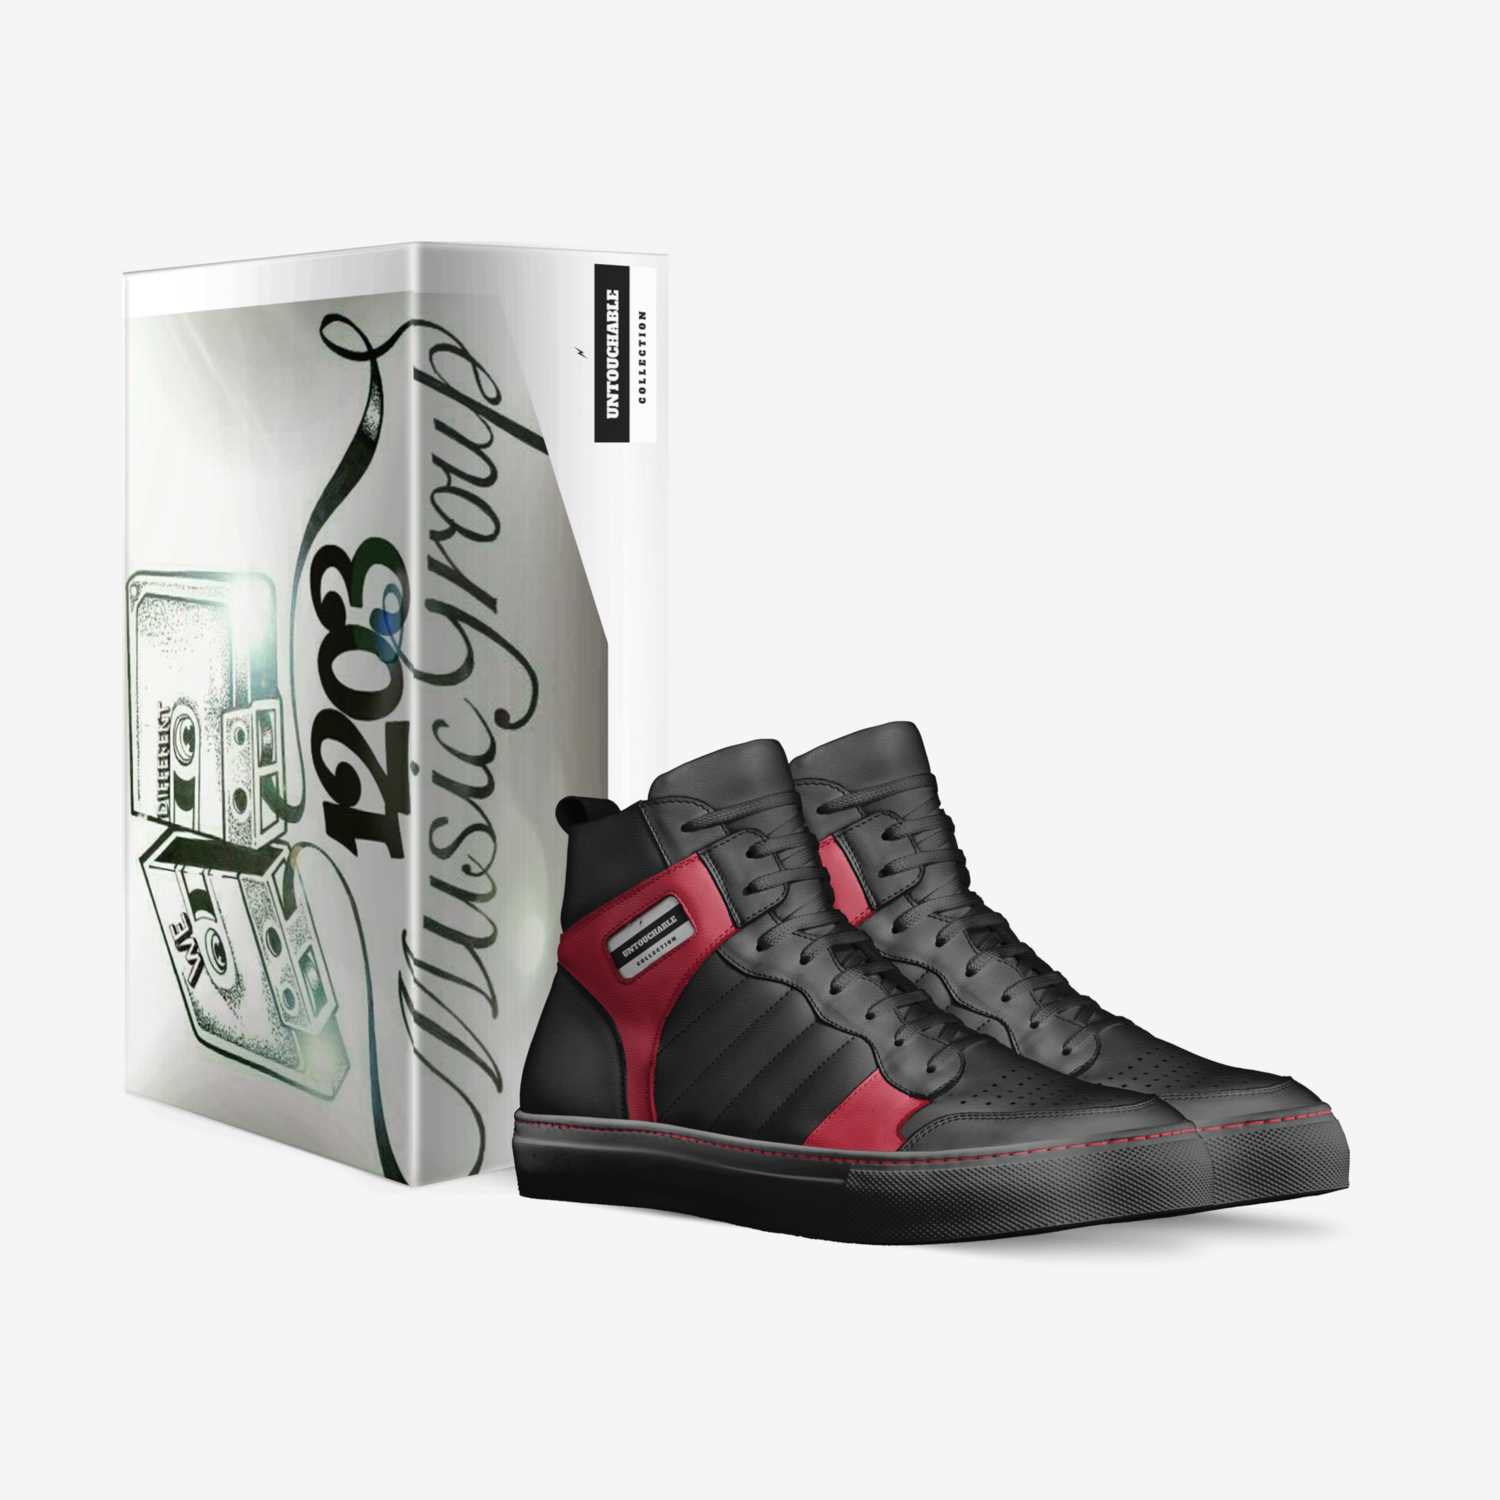  UNTOUCHABLE  custom made in Italy shoes by Untouchable Williams | Box view